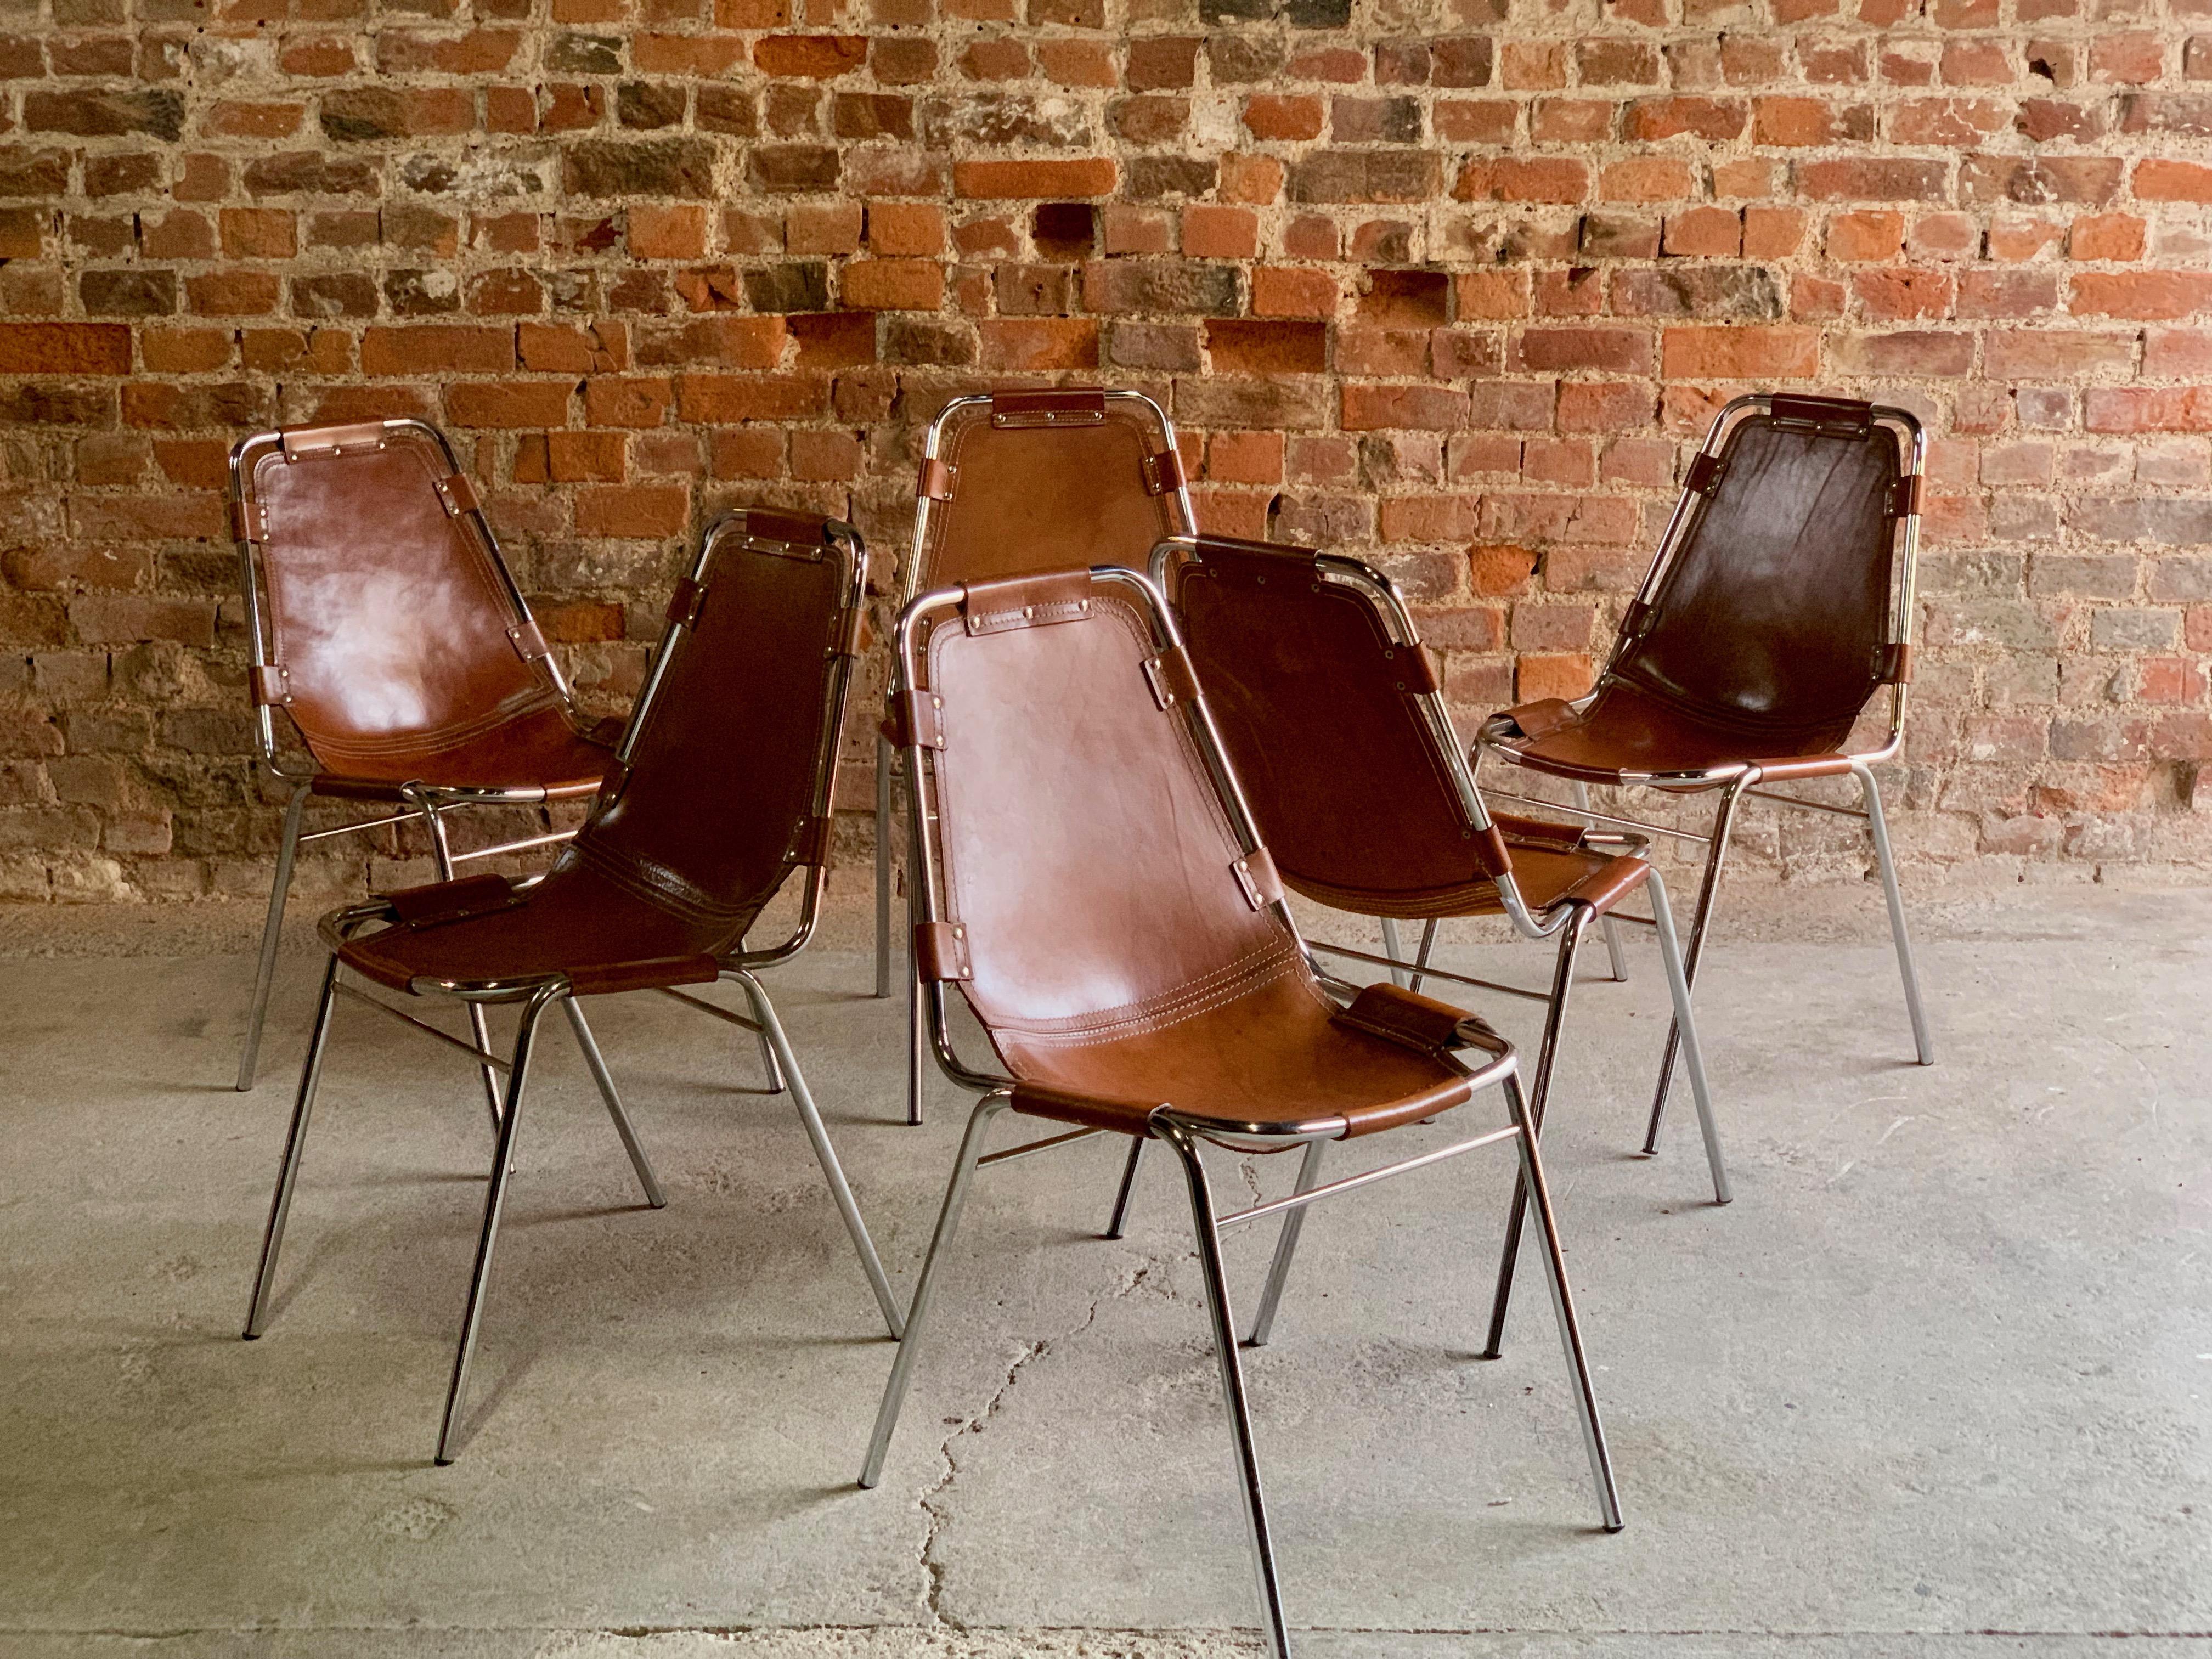 Les Arcs' Six Dining Chairs, 1970s

Fabulous set of six tan leather 'Les Arcs' dining chairs manufactured by the Italian firm, Dal Vera, and selected by Charlotte Perriand for the Les Arcs ski resort,, each chair consists of a chrome tubular frame